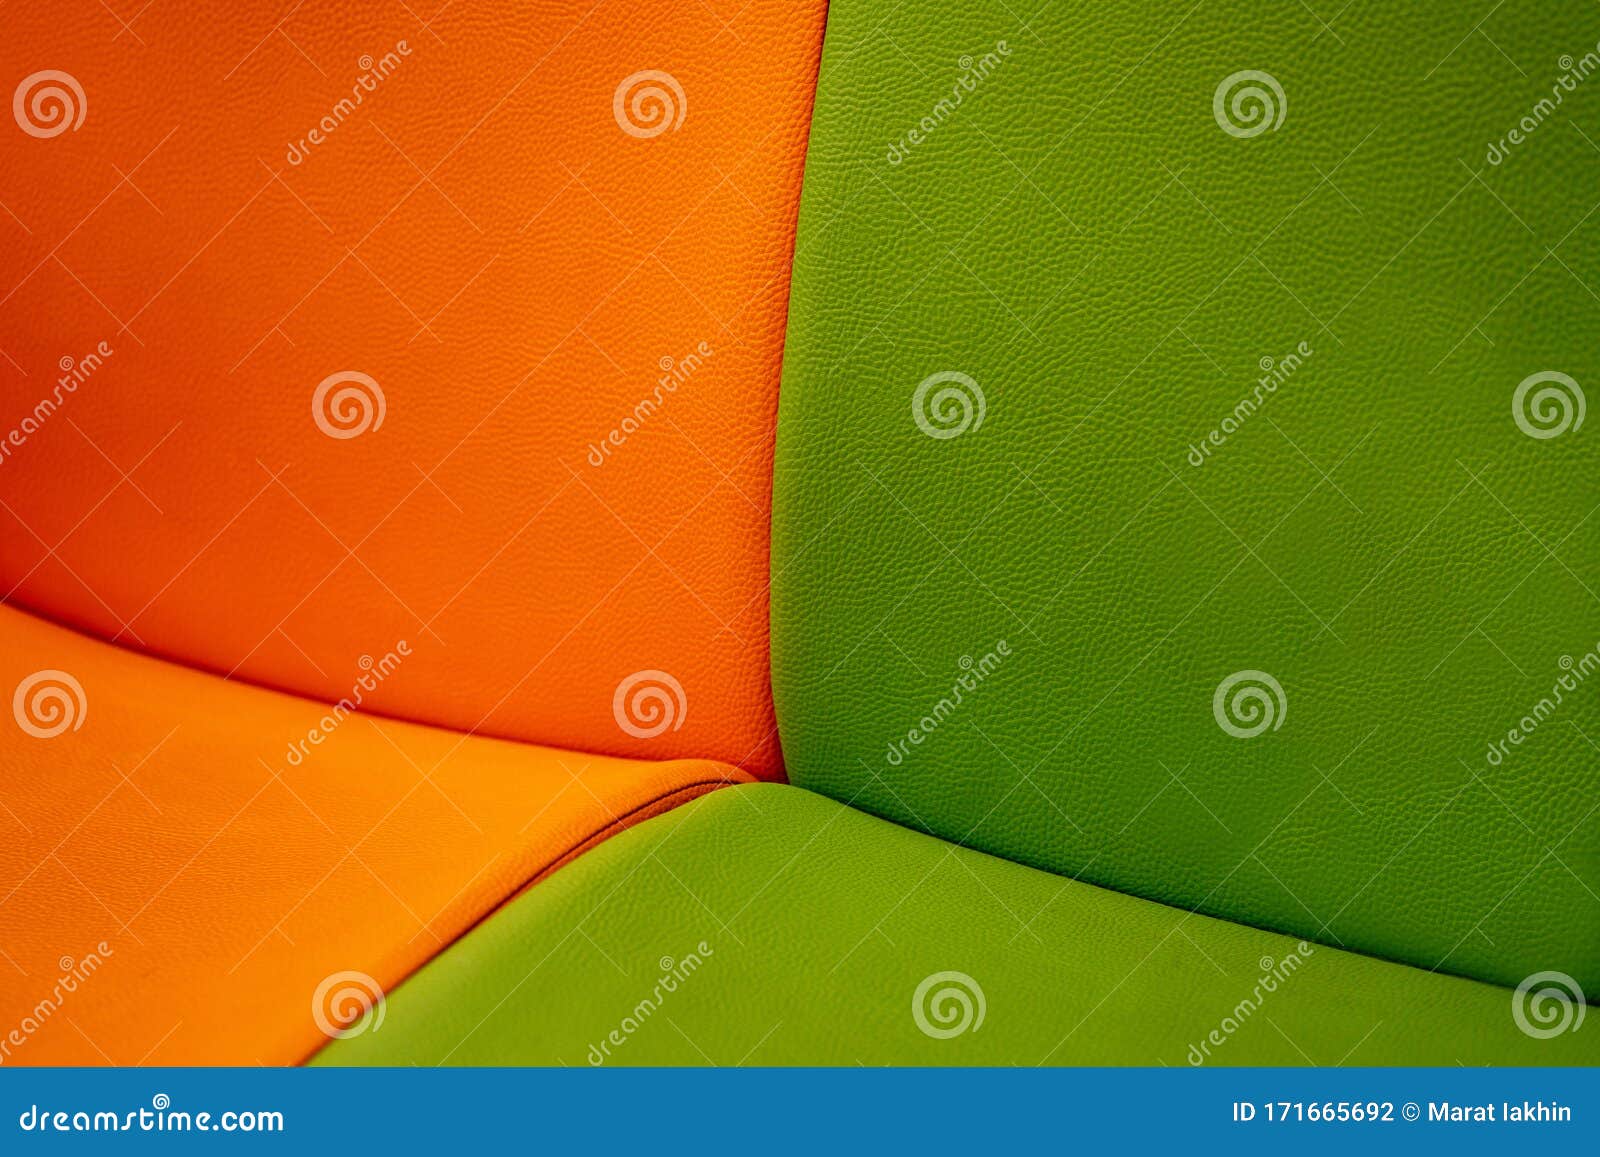 Color Combinations Orange And Light Green Stock Photo Image Of Colorful Light 171665692,Diy Country Light Fixtures